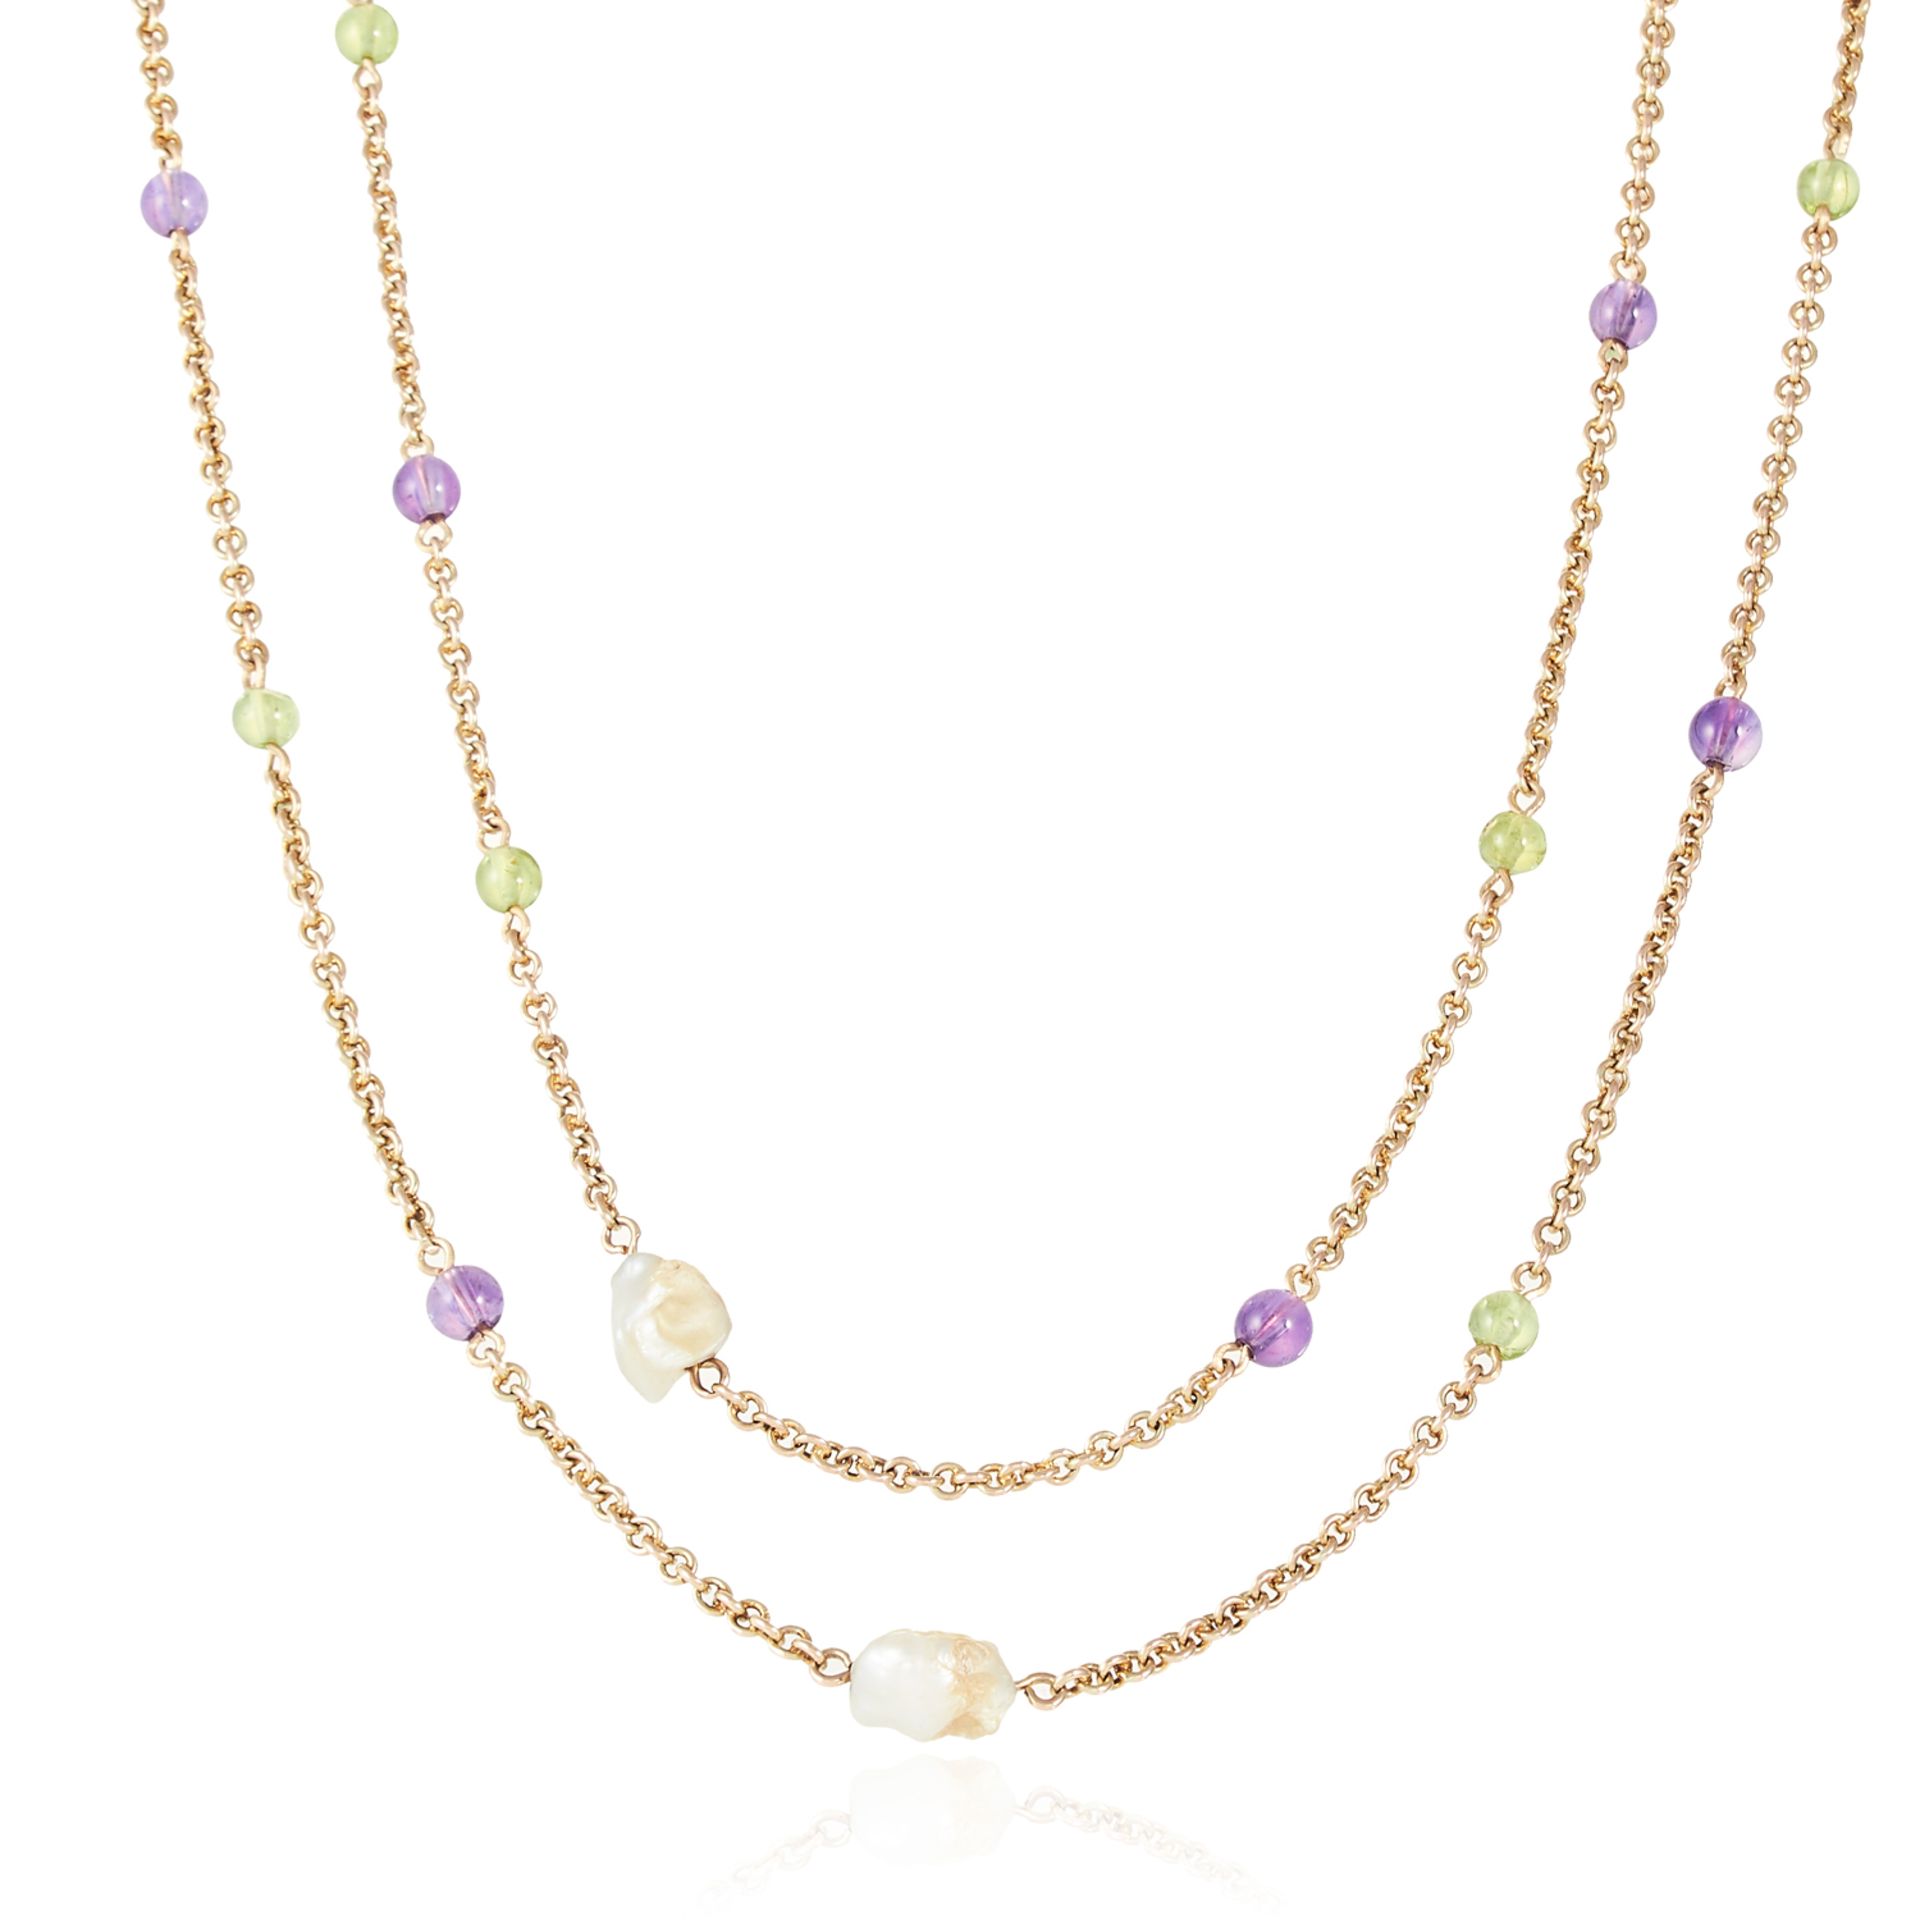 AN ANTIQUE NATURAL PEARL, PERIDOT AND AMETHYST SUFFRAGETTE SAUTOIR NECKLACE, EARLY 20TH CENTURY in